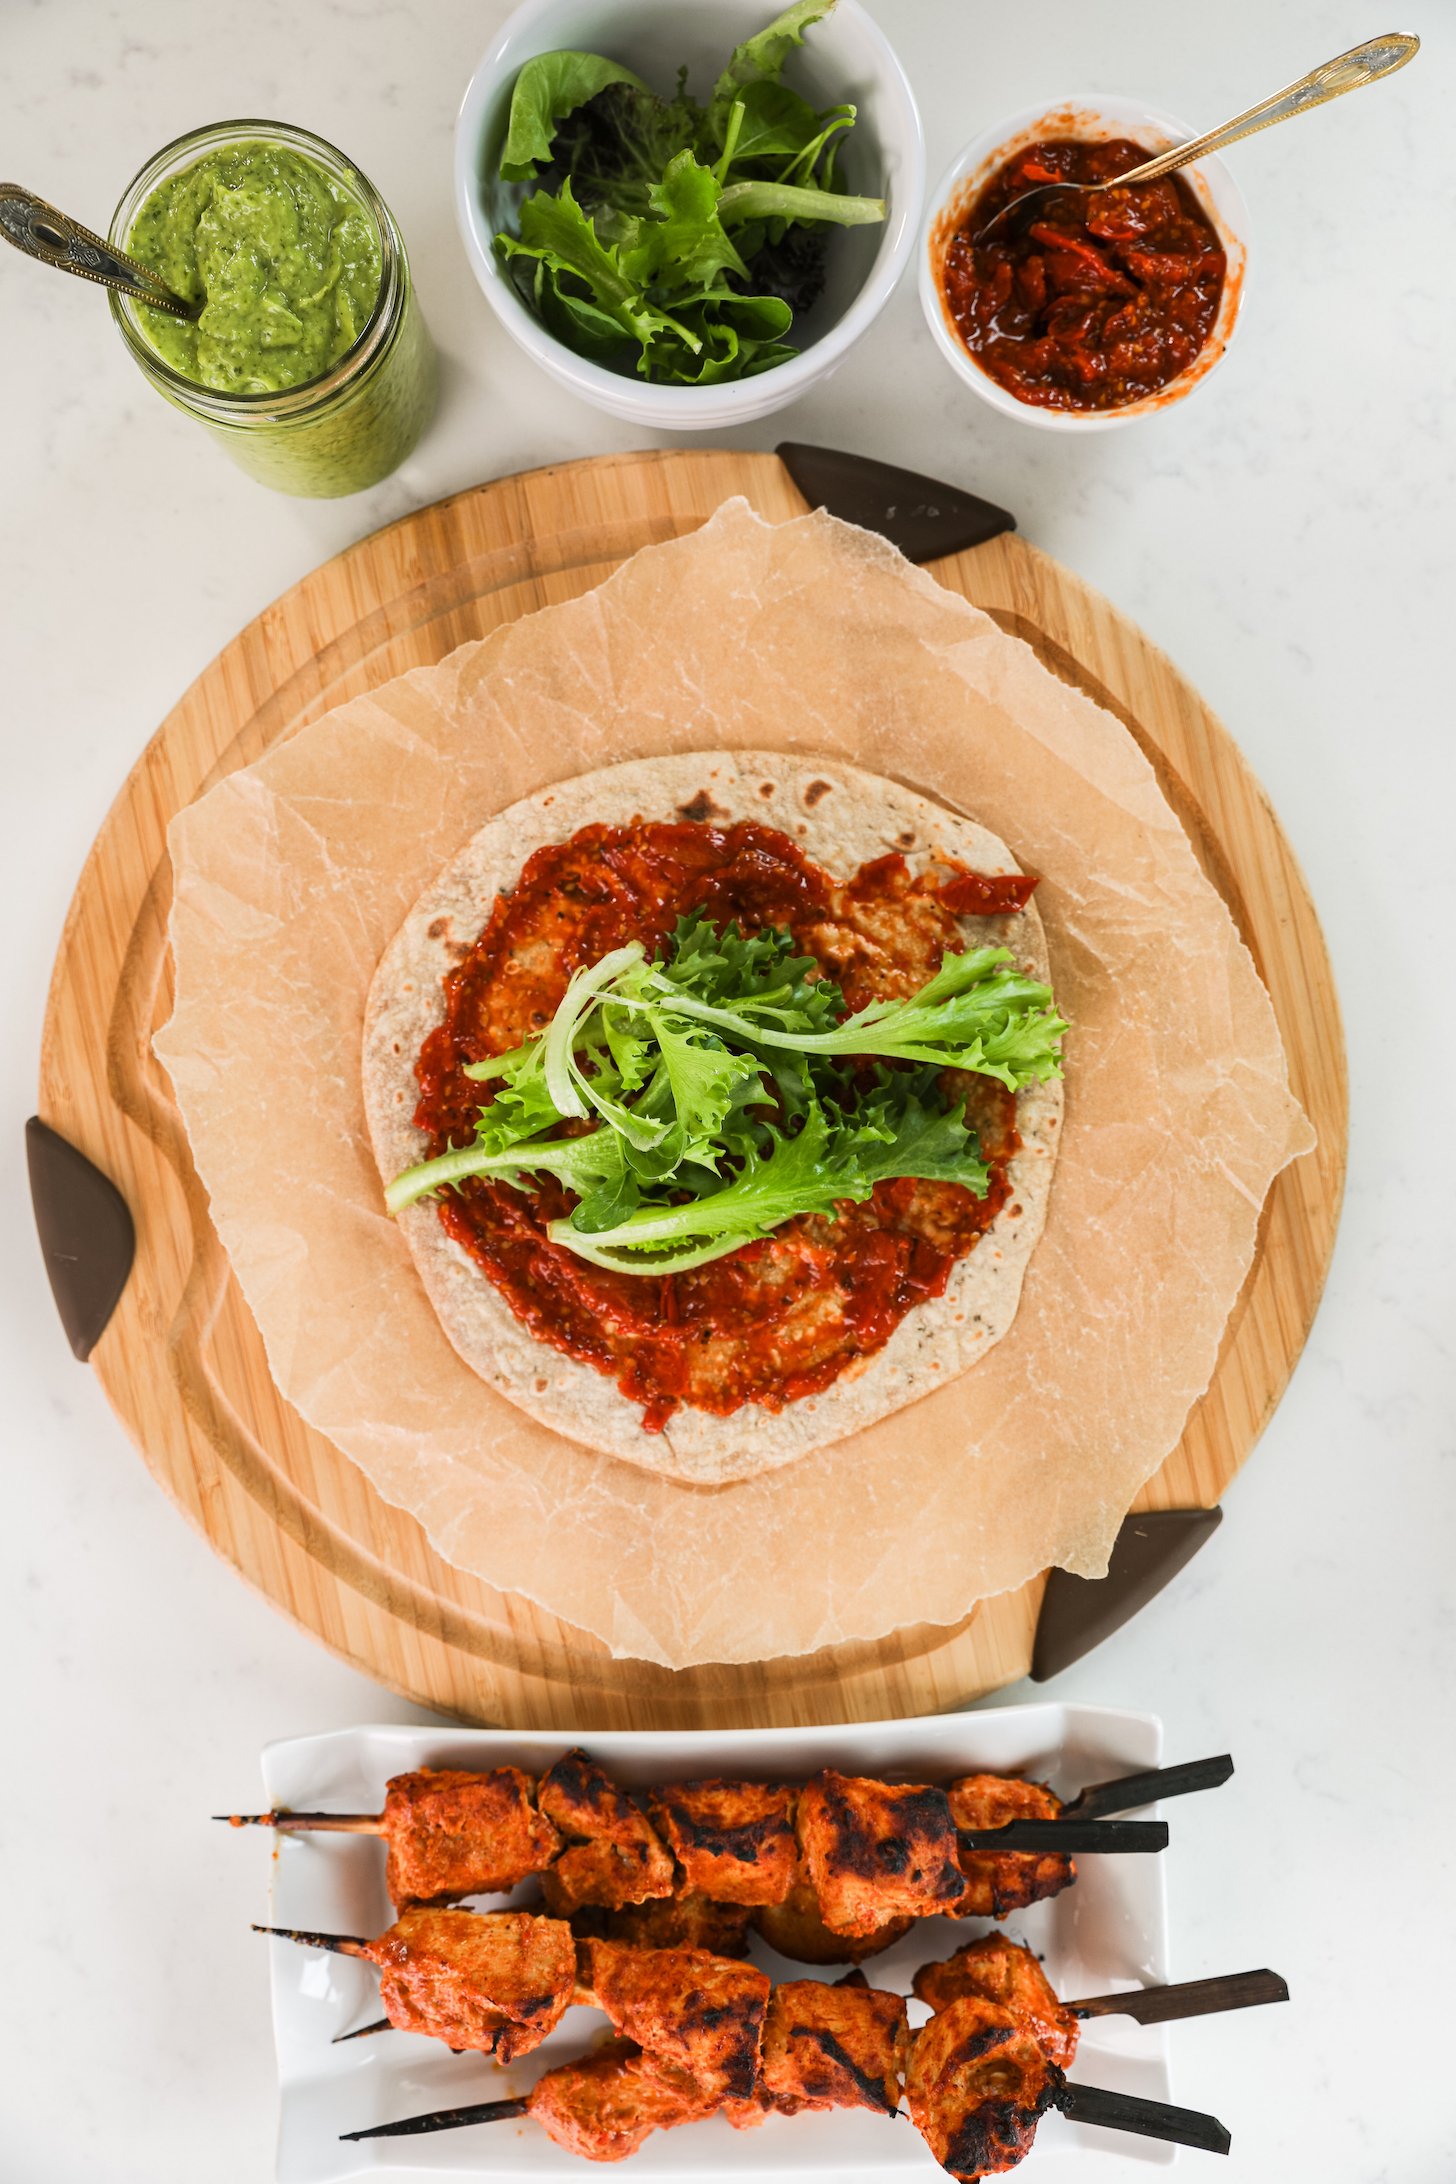 A roti spread with tomato sauce and greens with tandoori chicken skewers, sauces and salad greens nearby.